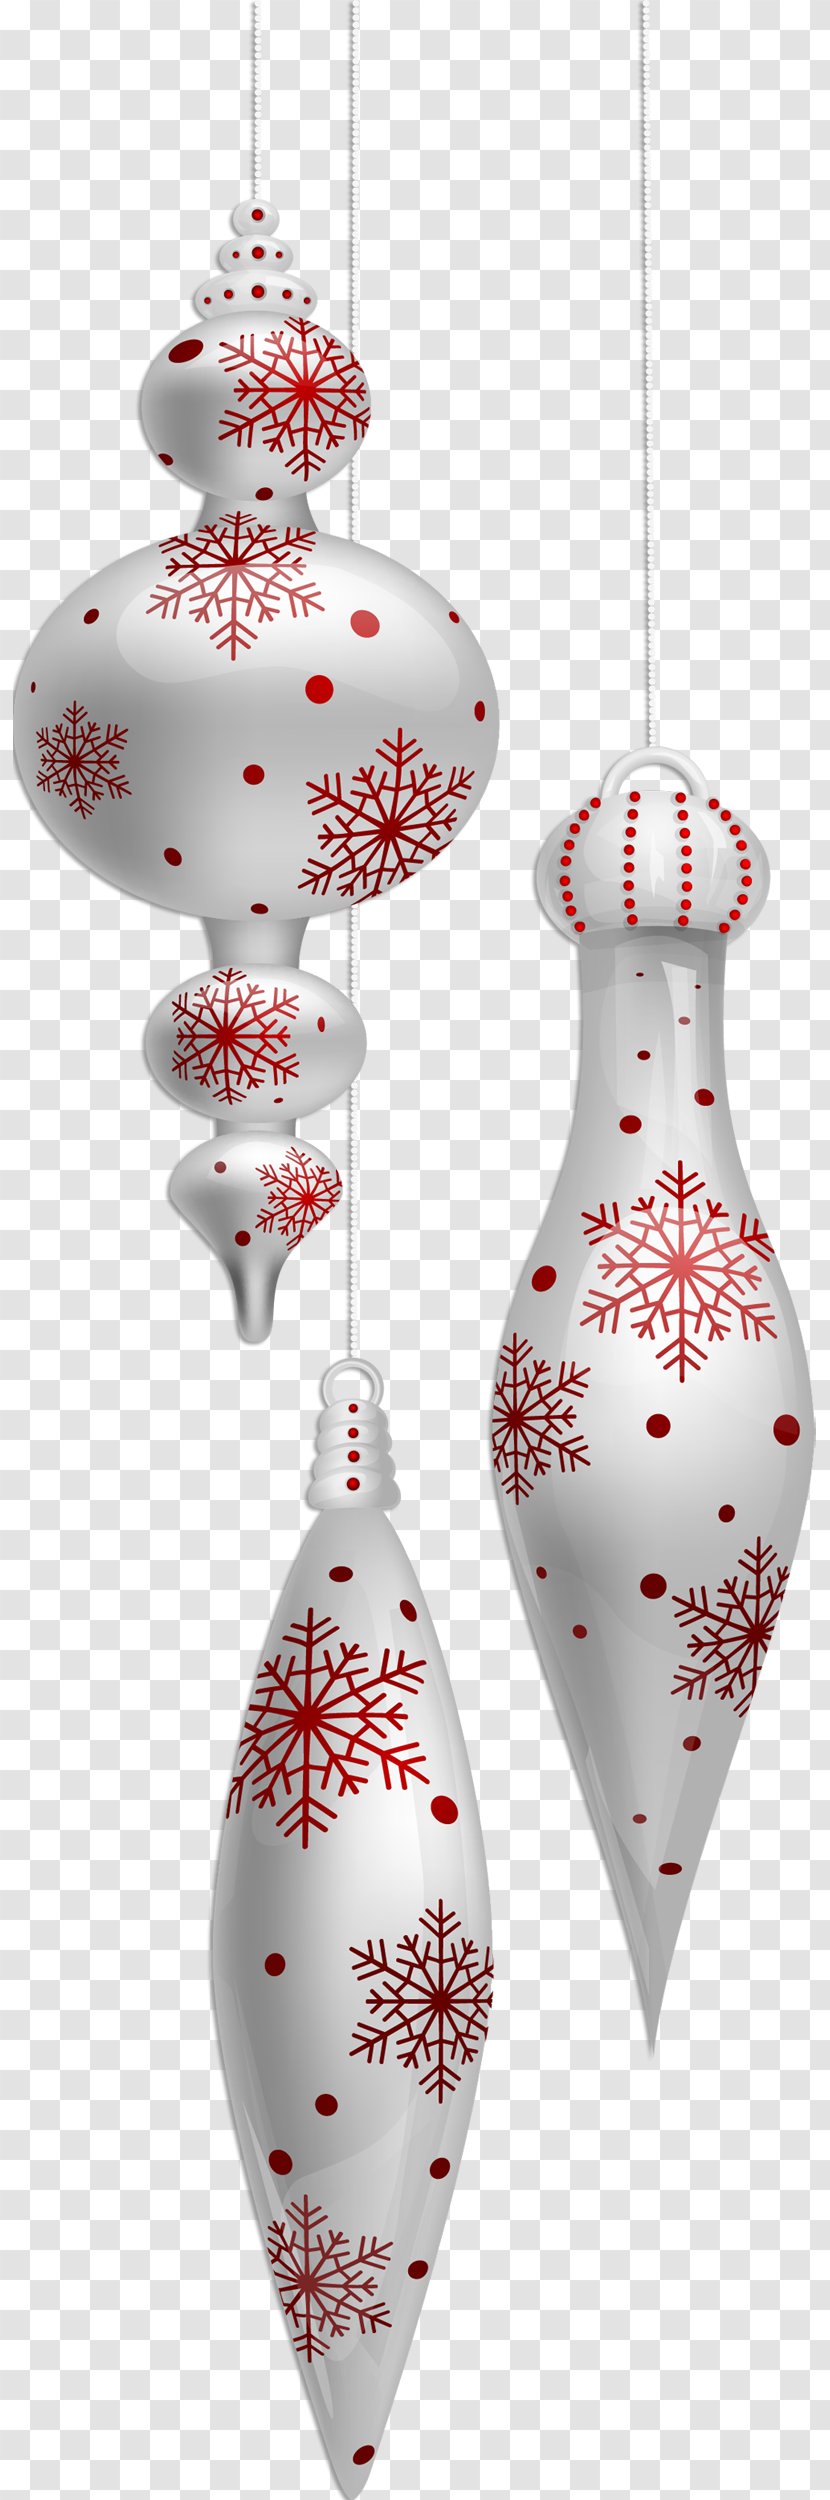 Christmas Ornament Snowflake Decoration Clip Art - Icicle - Shuttlecock Transparent PNG